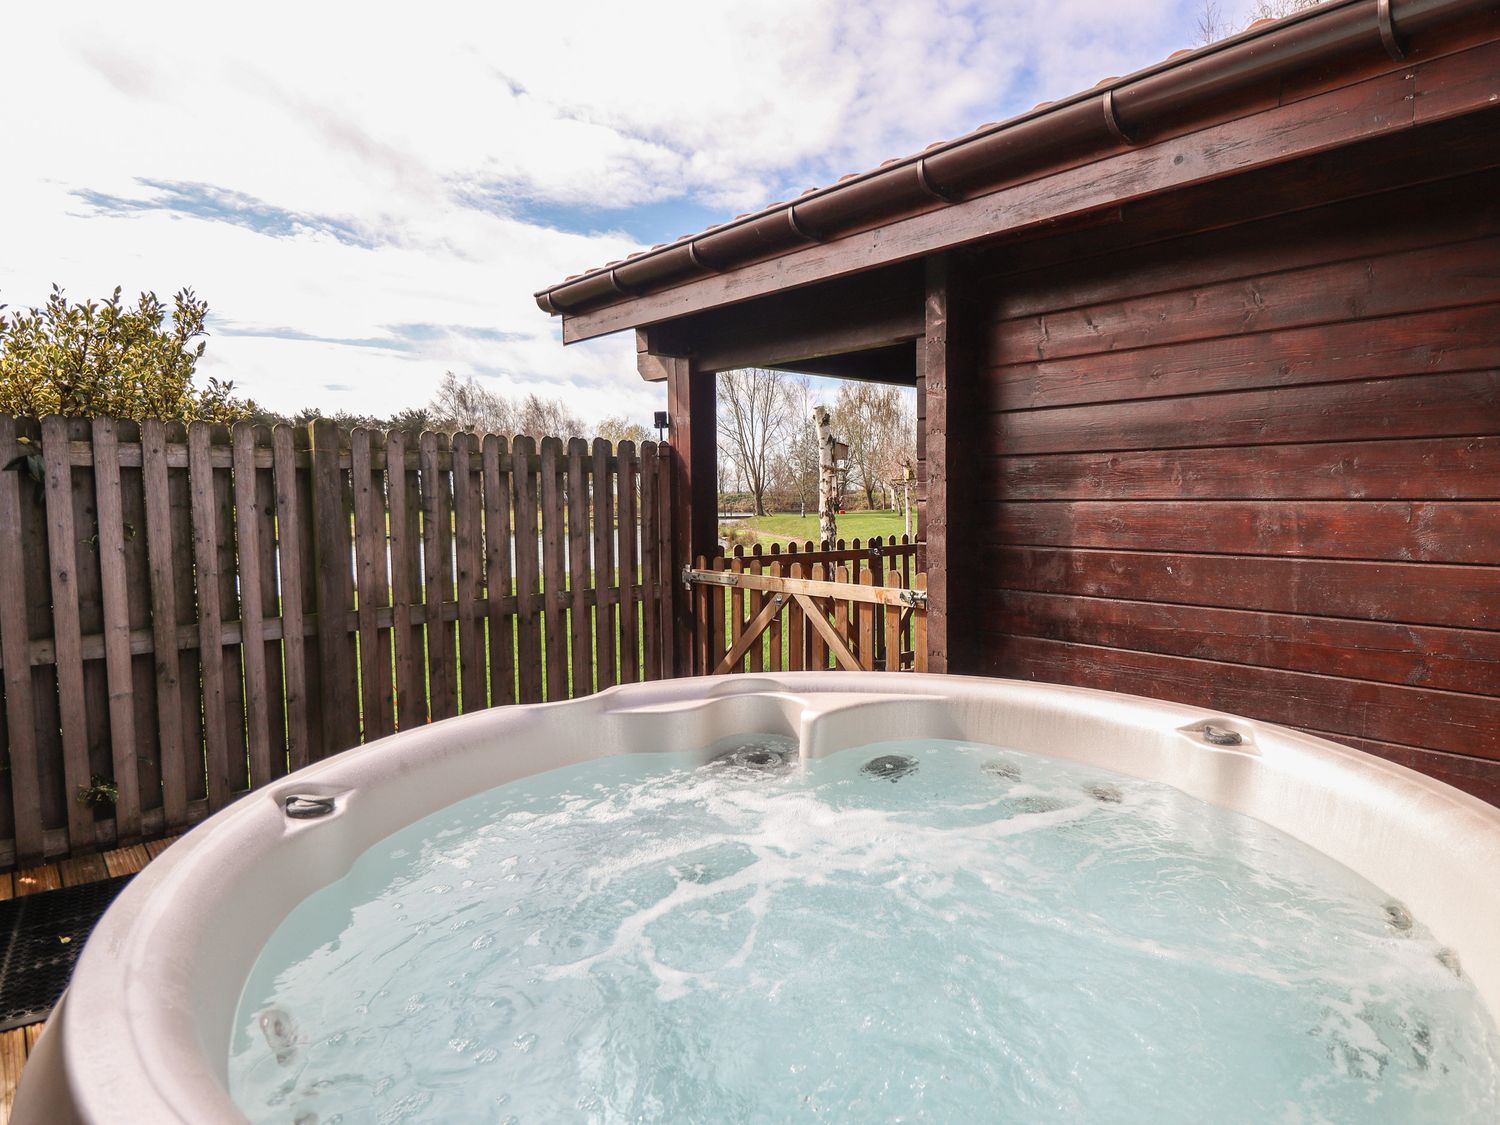 Badger Lodge in Stainfield in Lincolnshire, sleeps four in two bedrooms. Off-road parking and pets.